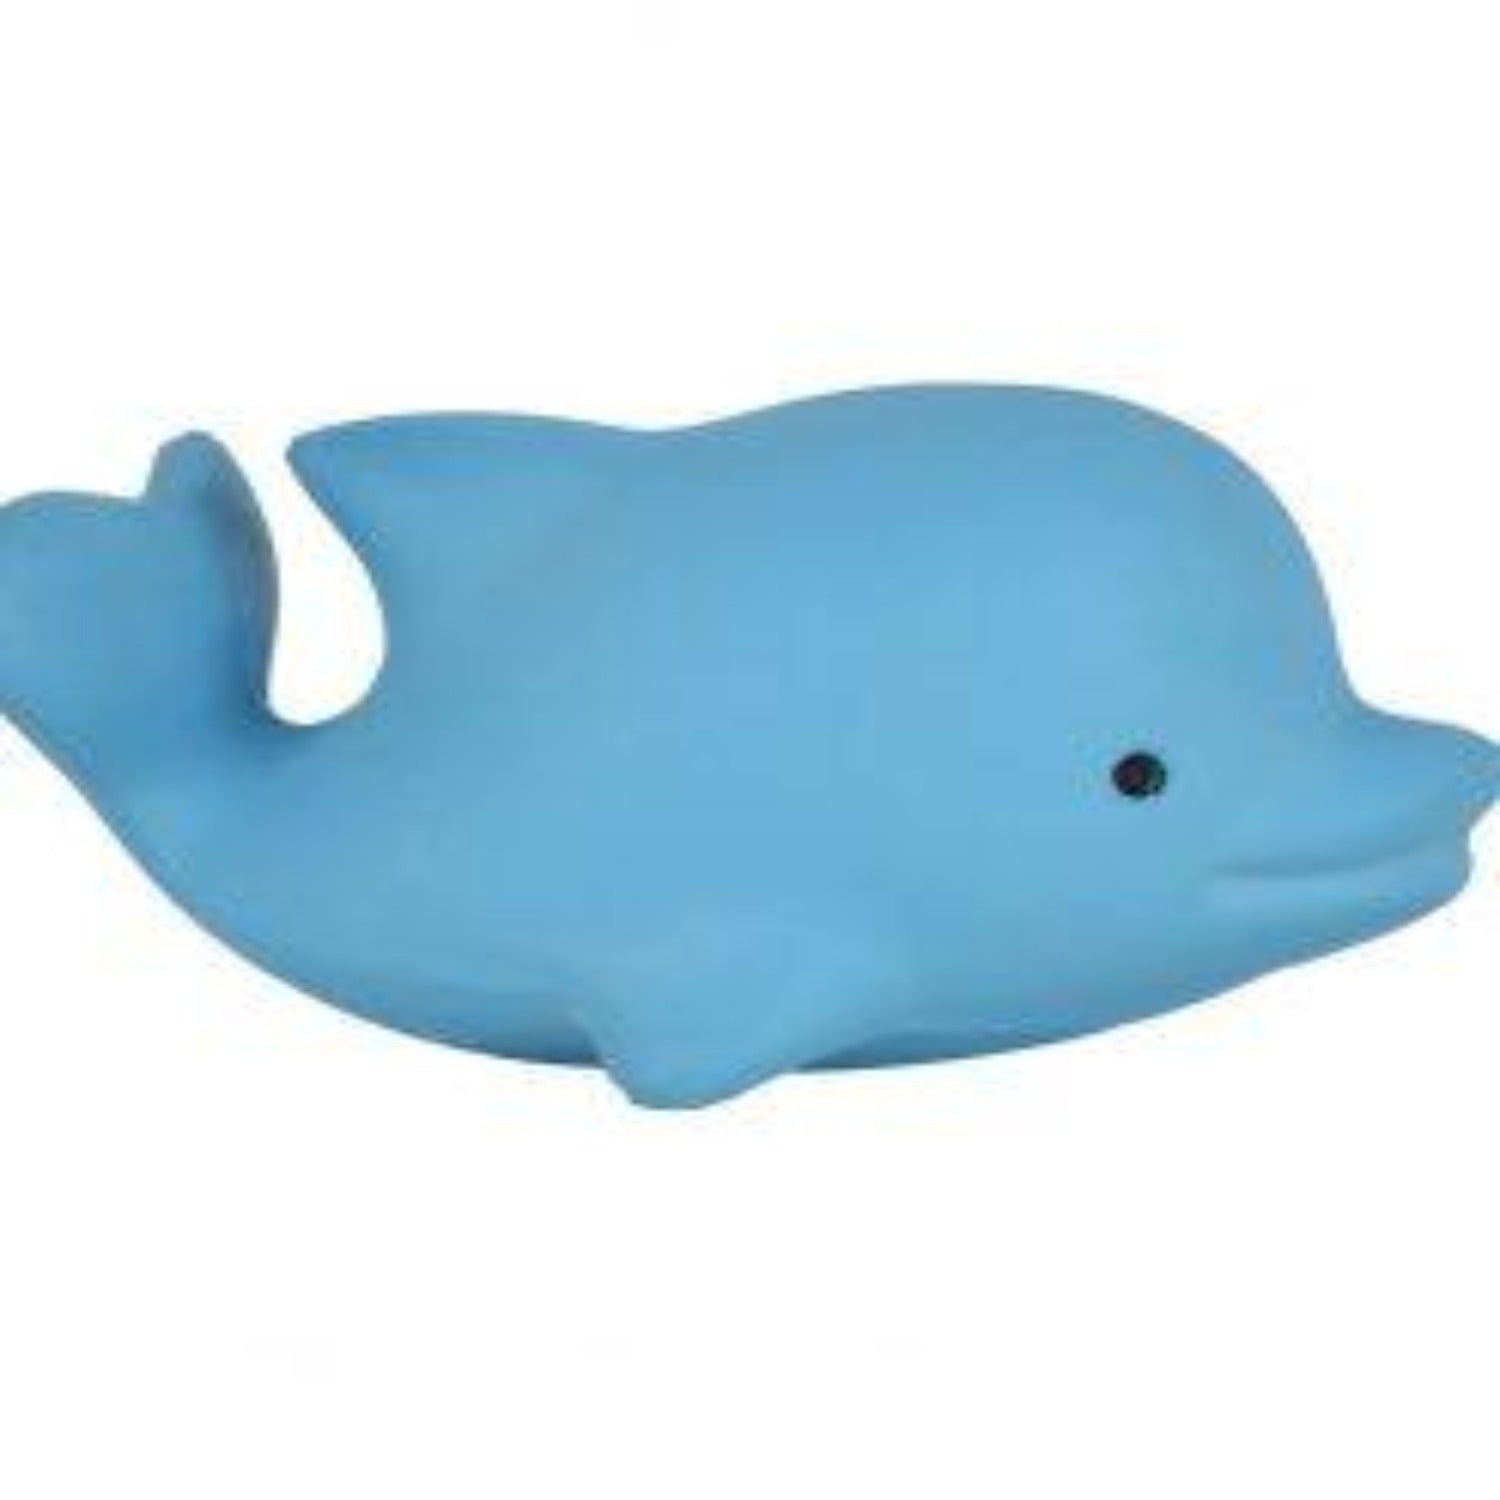 Natural material Dolphin teether & bath toy